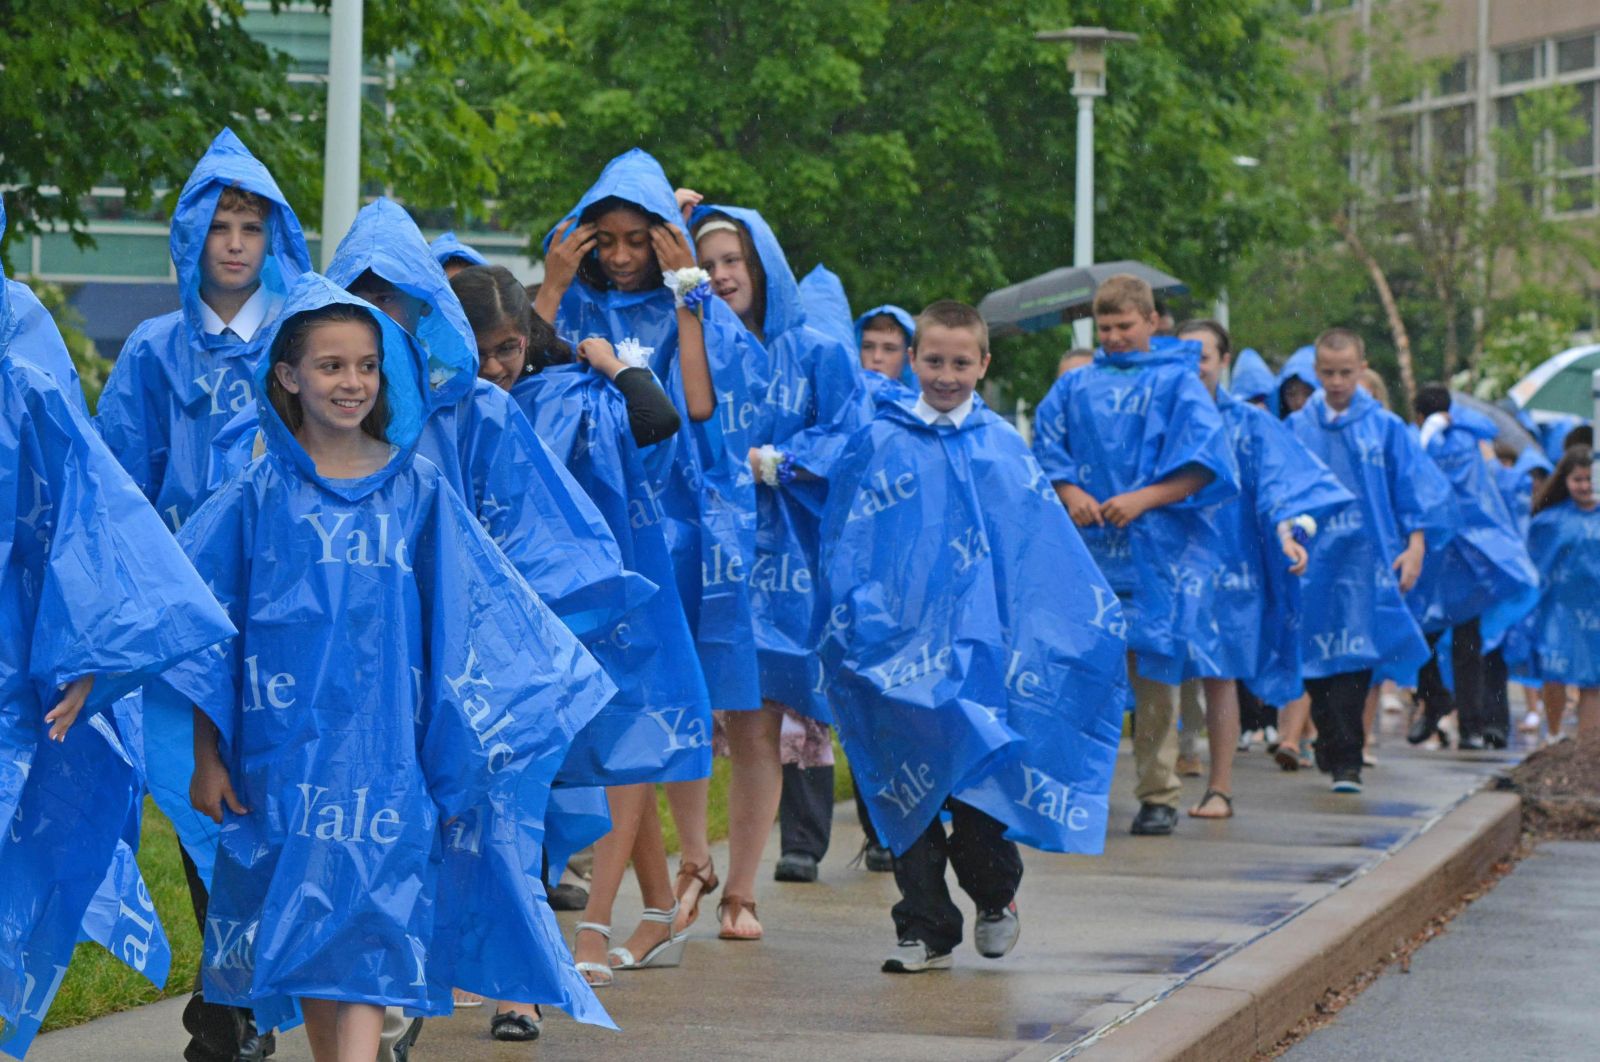 Peck Place Elementary School students in ponchos